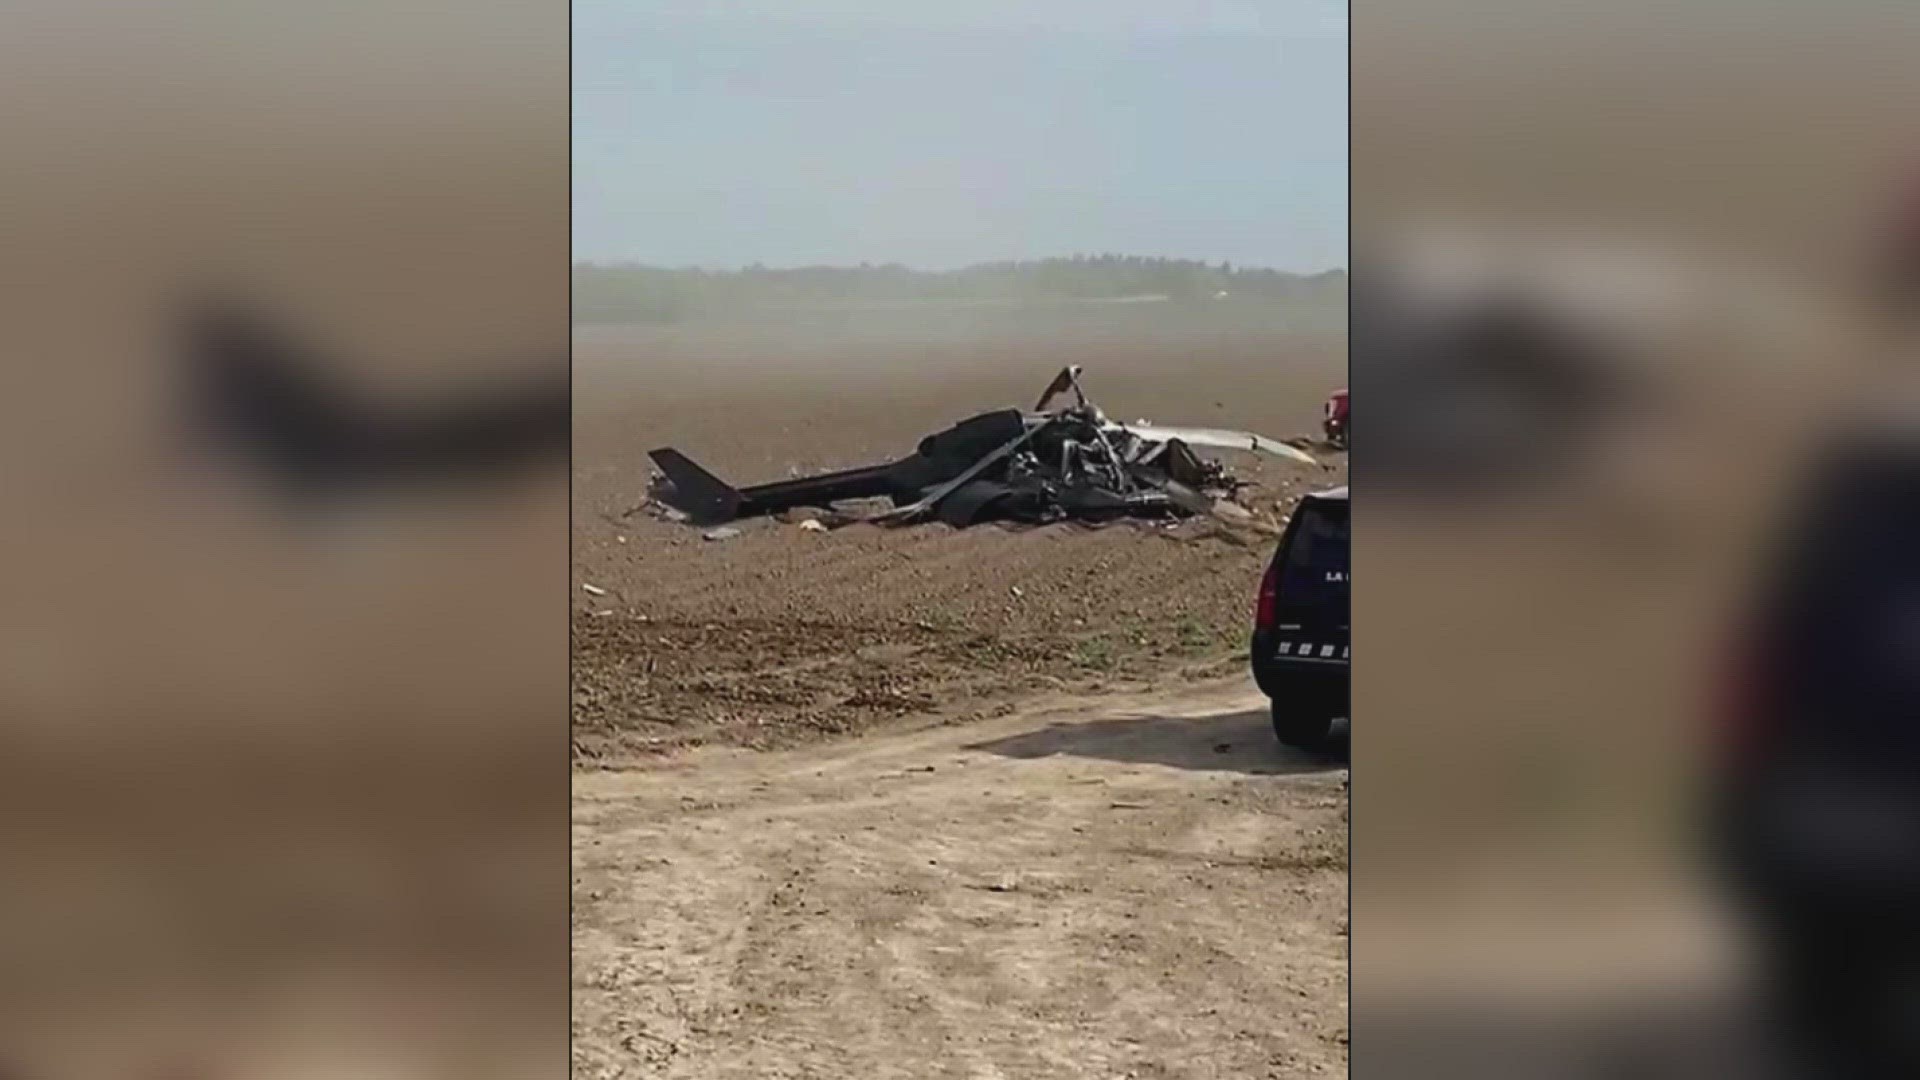 Federal officials said the helicopter crash just before 3 p.m. Mountain Time near the town of La Grulla.